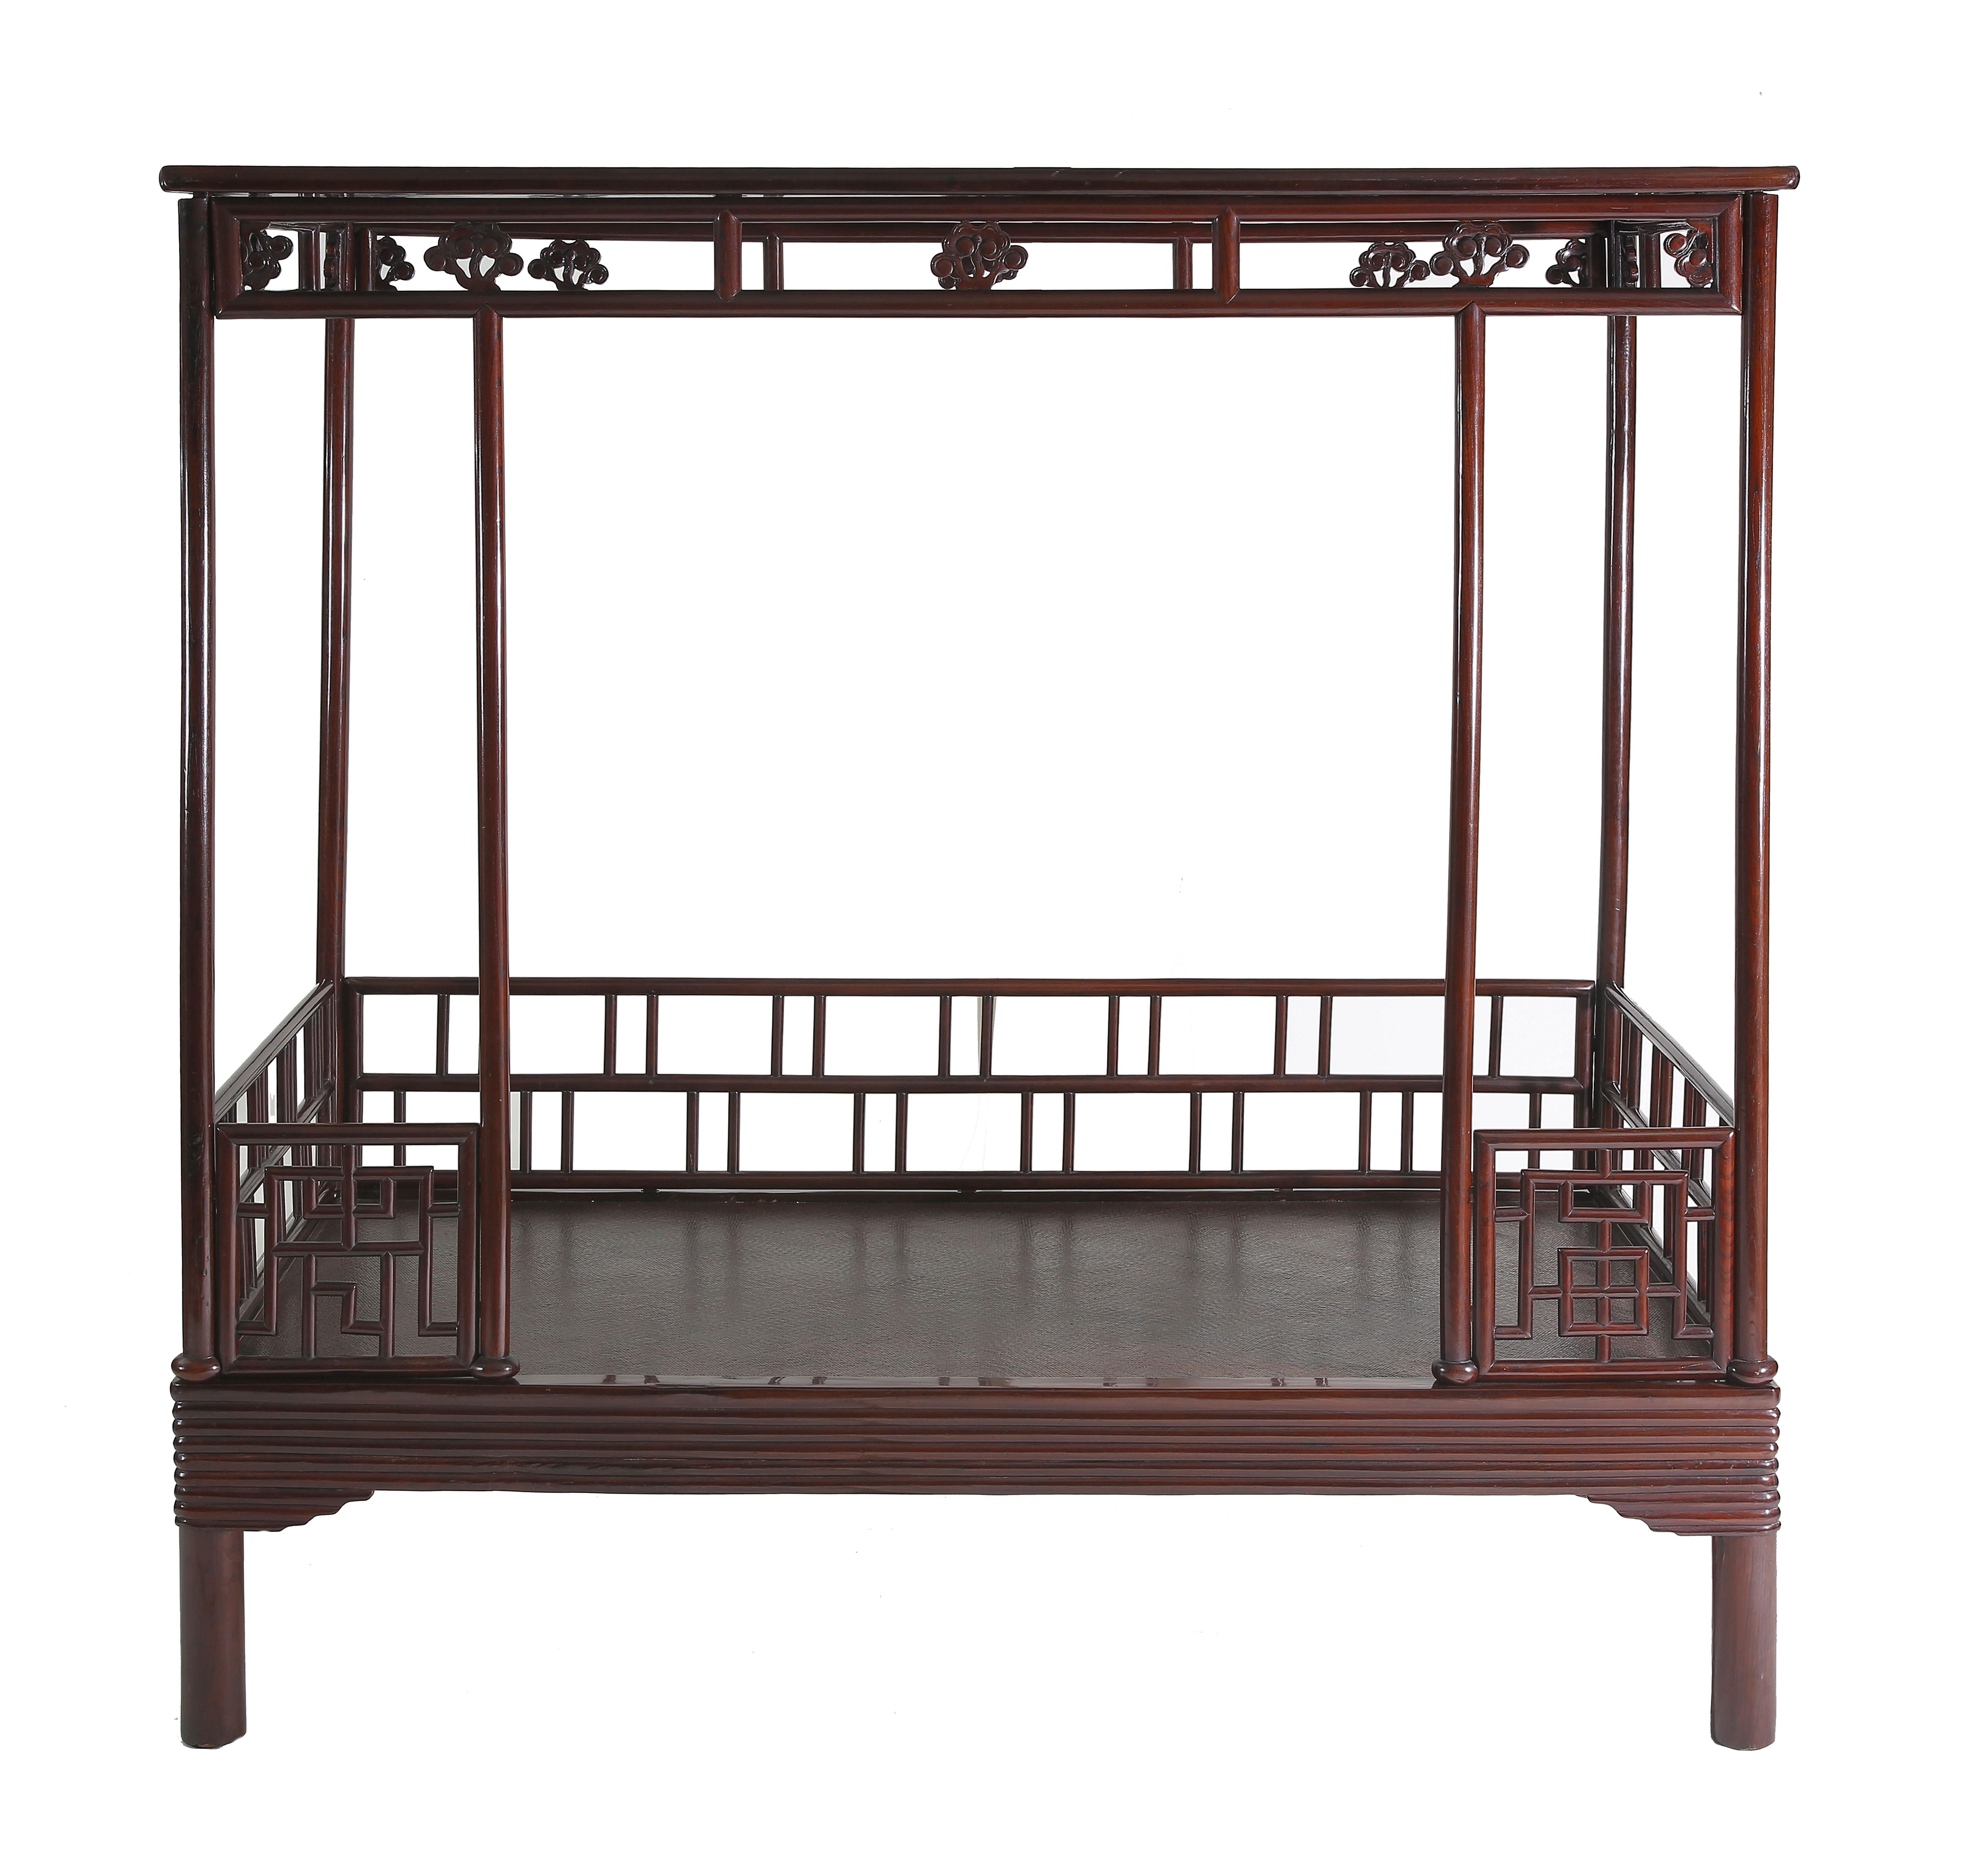 The bed bse frame enclosing a cane top and decorated with wrapped-around lipped molded edges and spandrels, supported on circular-sectioned legs; the six posts braced on the back and sides by railings of fretwork, two short railings flanking the